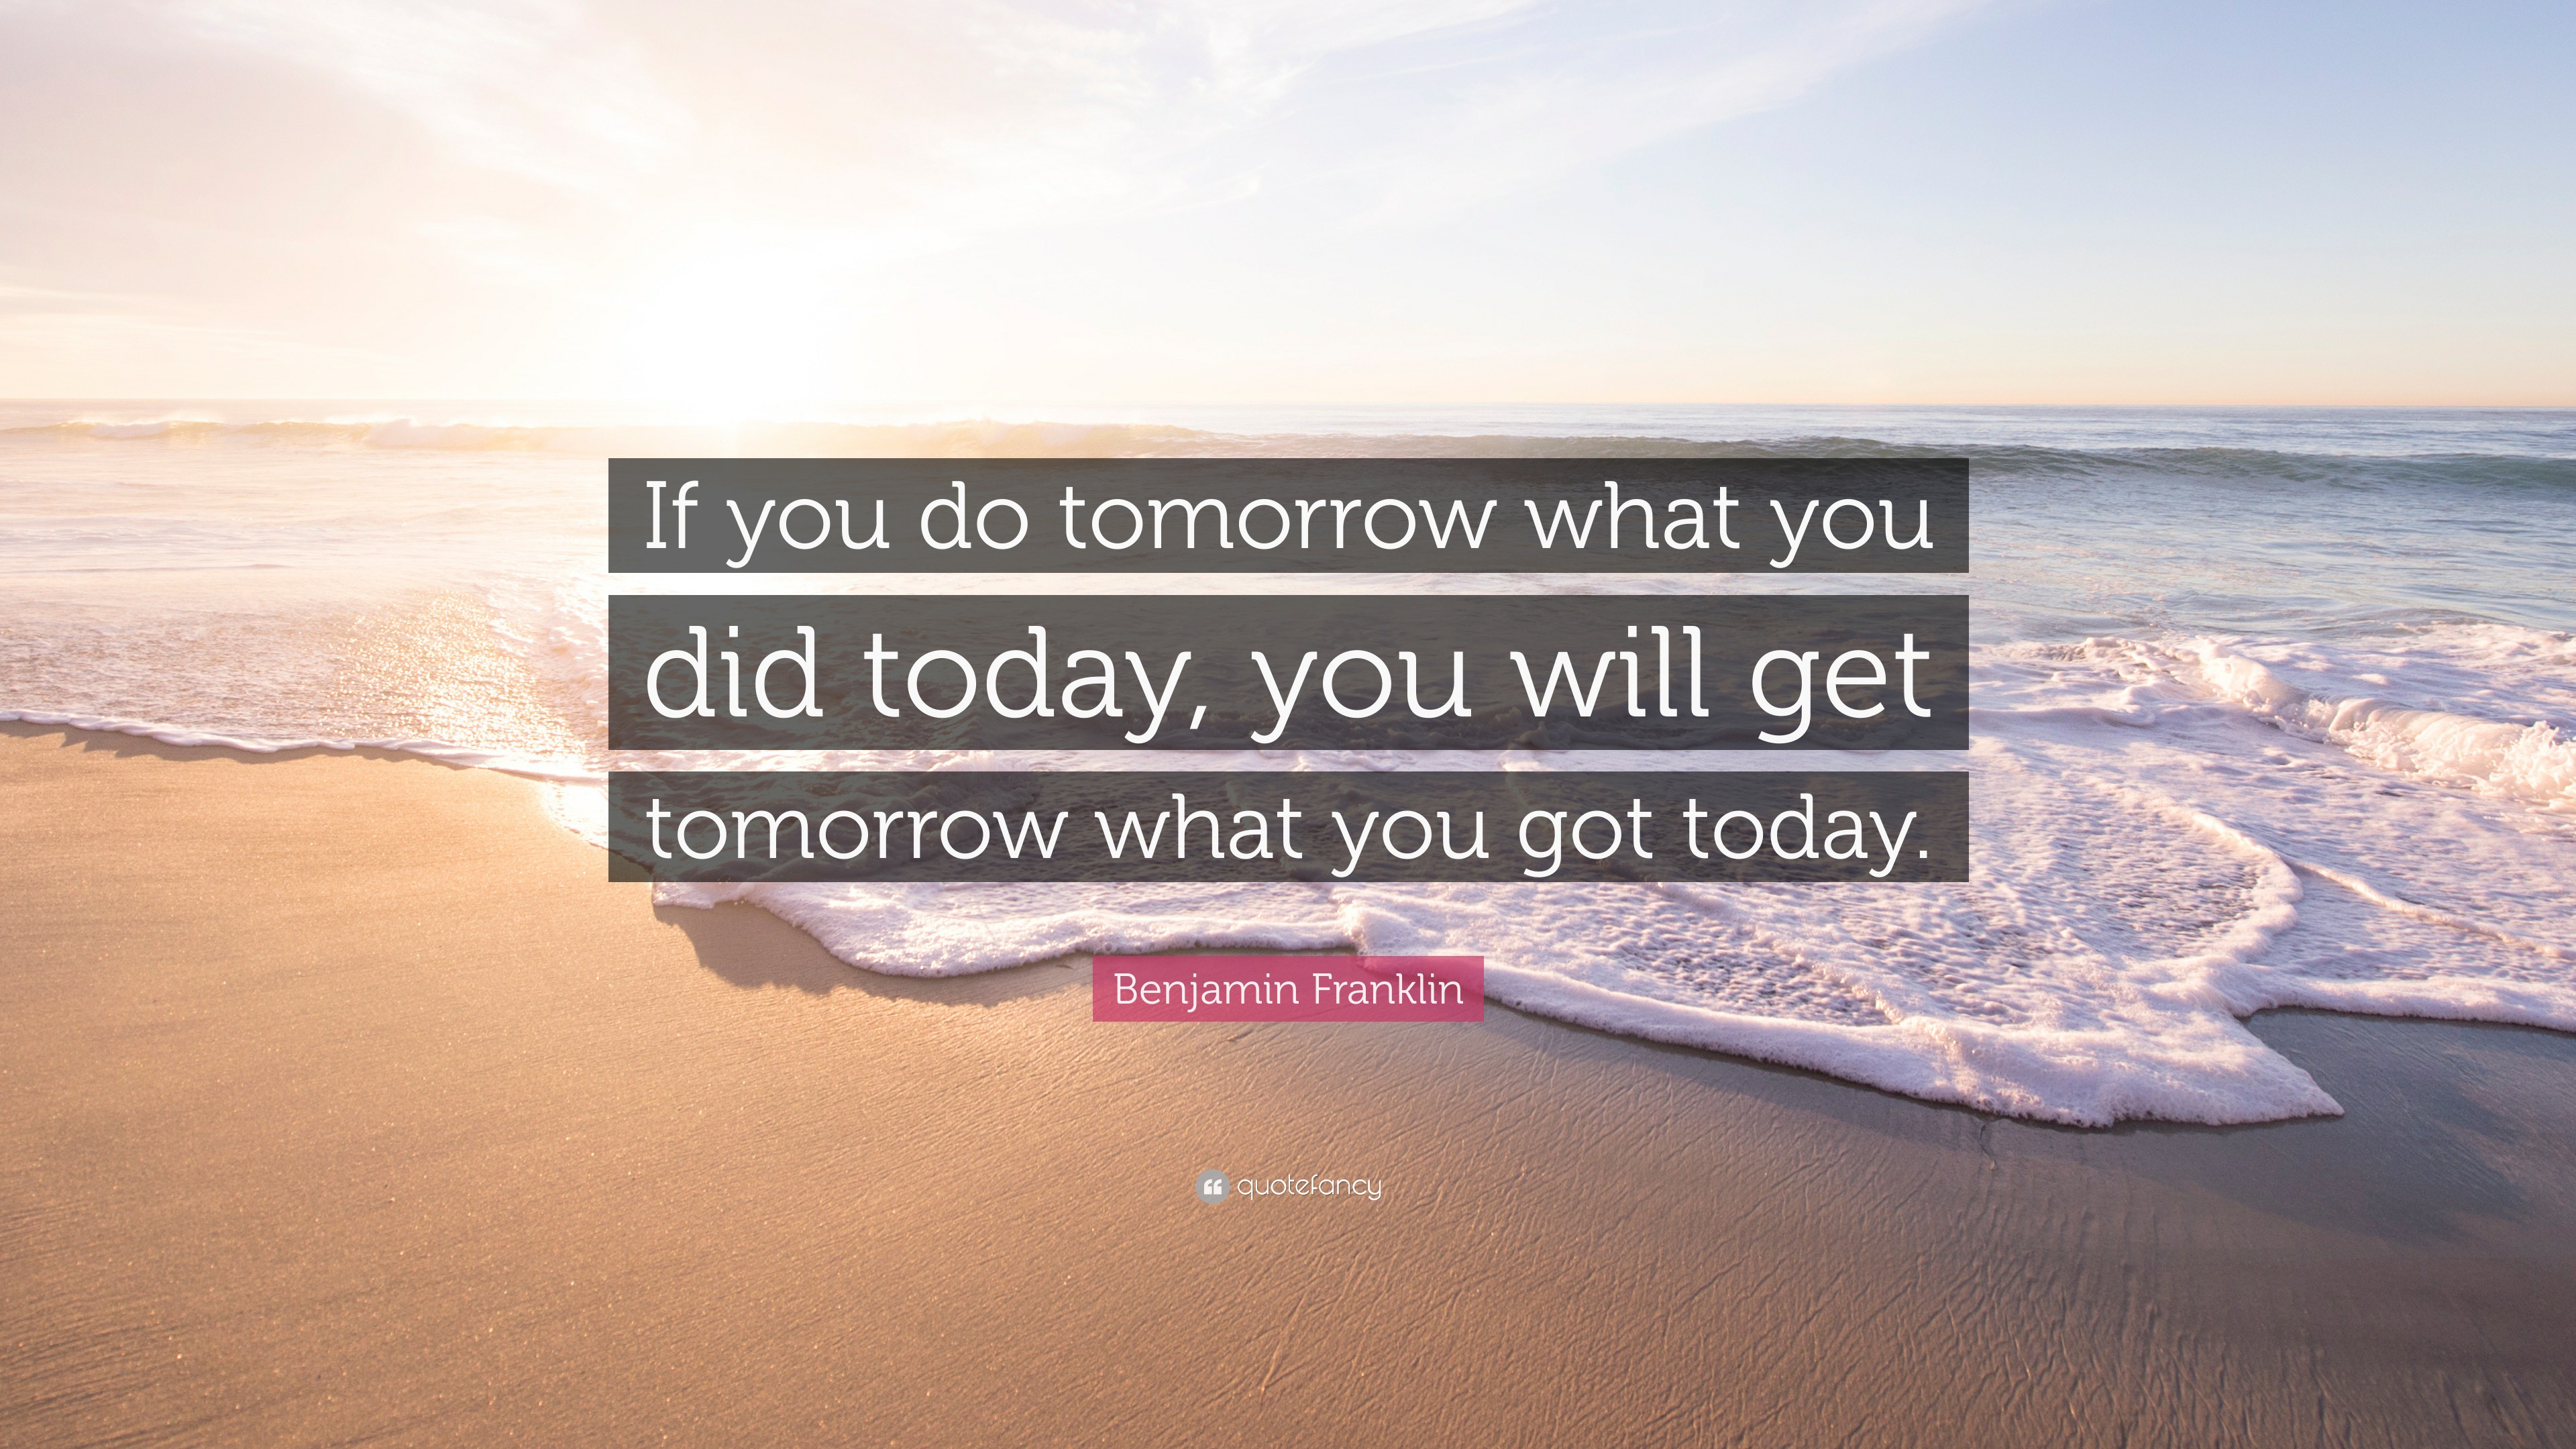 Benjamin Franklin Quote If You Do Tomorrow What You Did Today You Will Get Tomorrow What You Got Today 7 Wallpapers Quotefancy